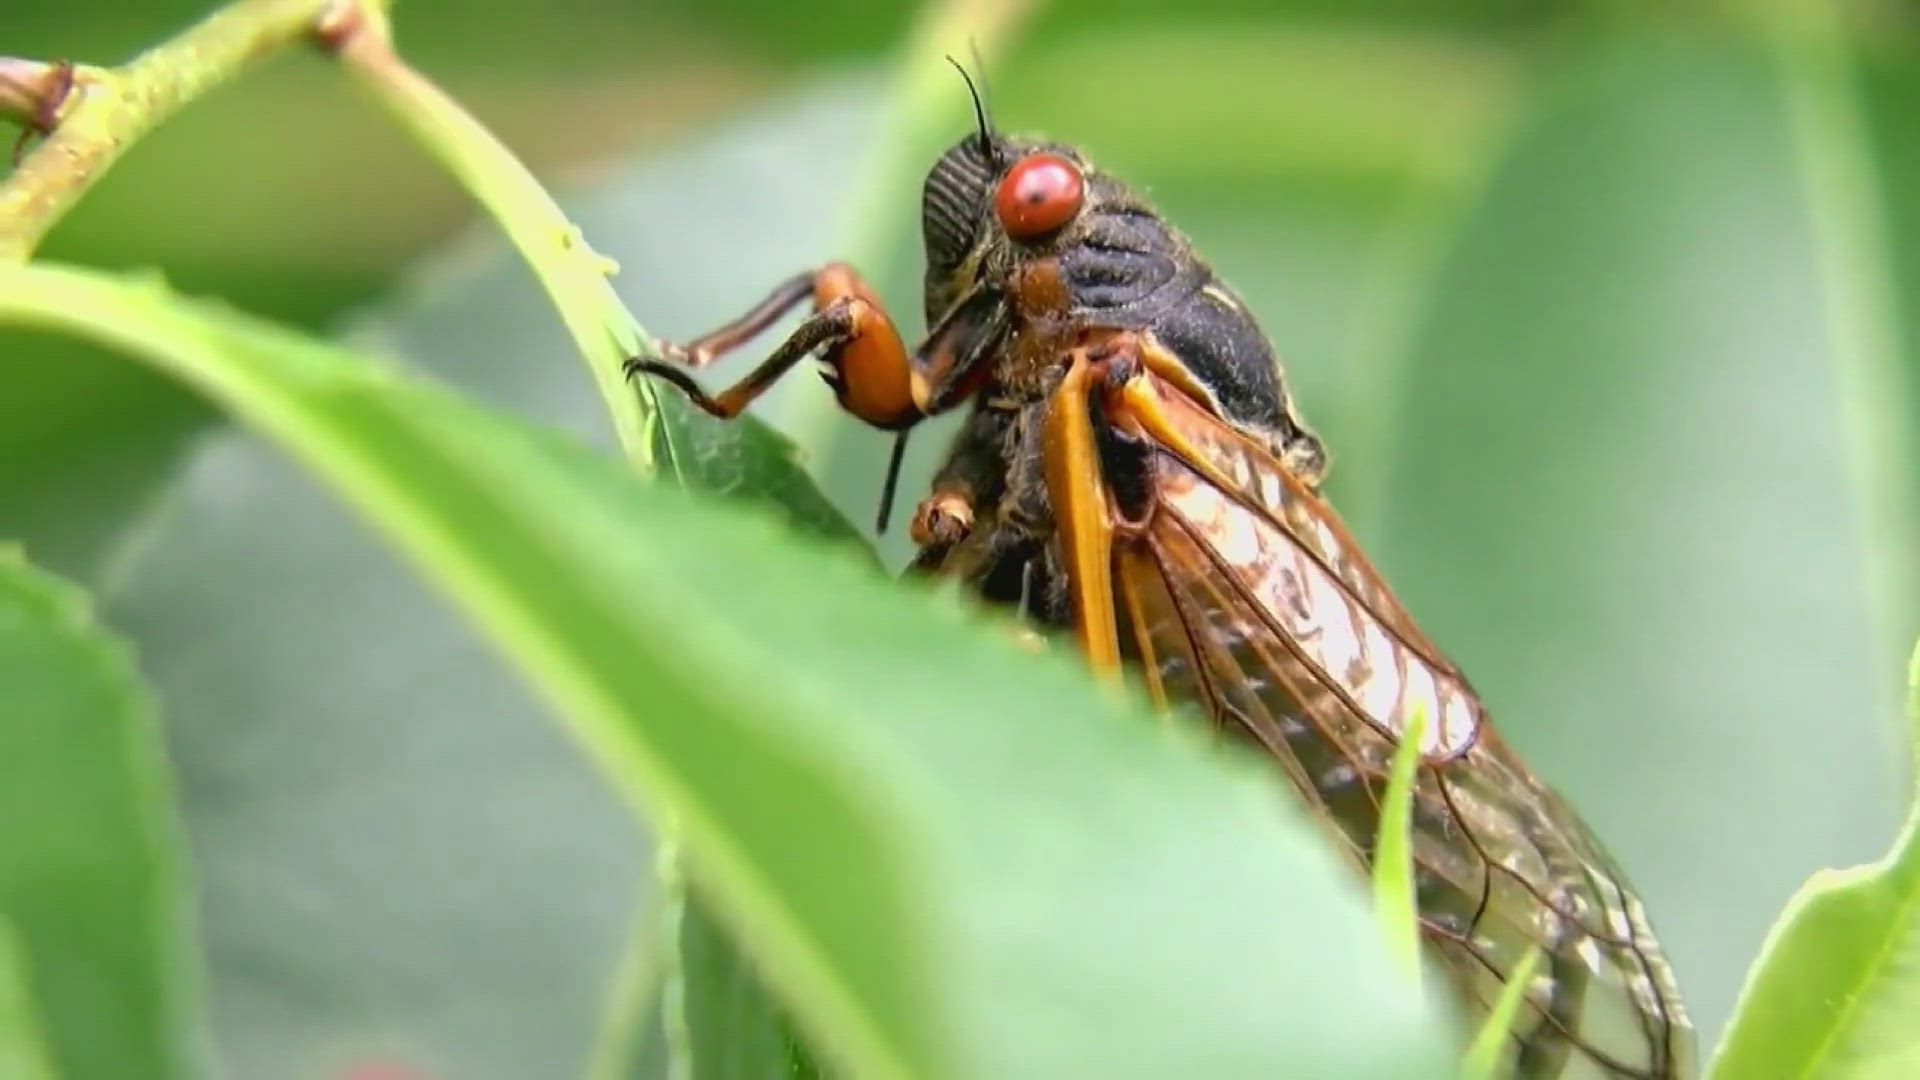 NC State professor answers your questions about the historic cicada emergence happening this year